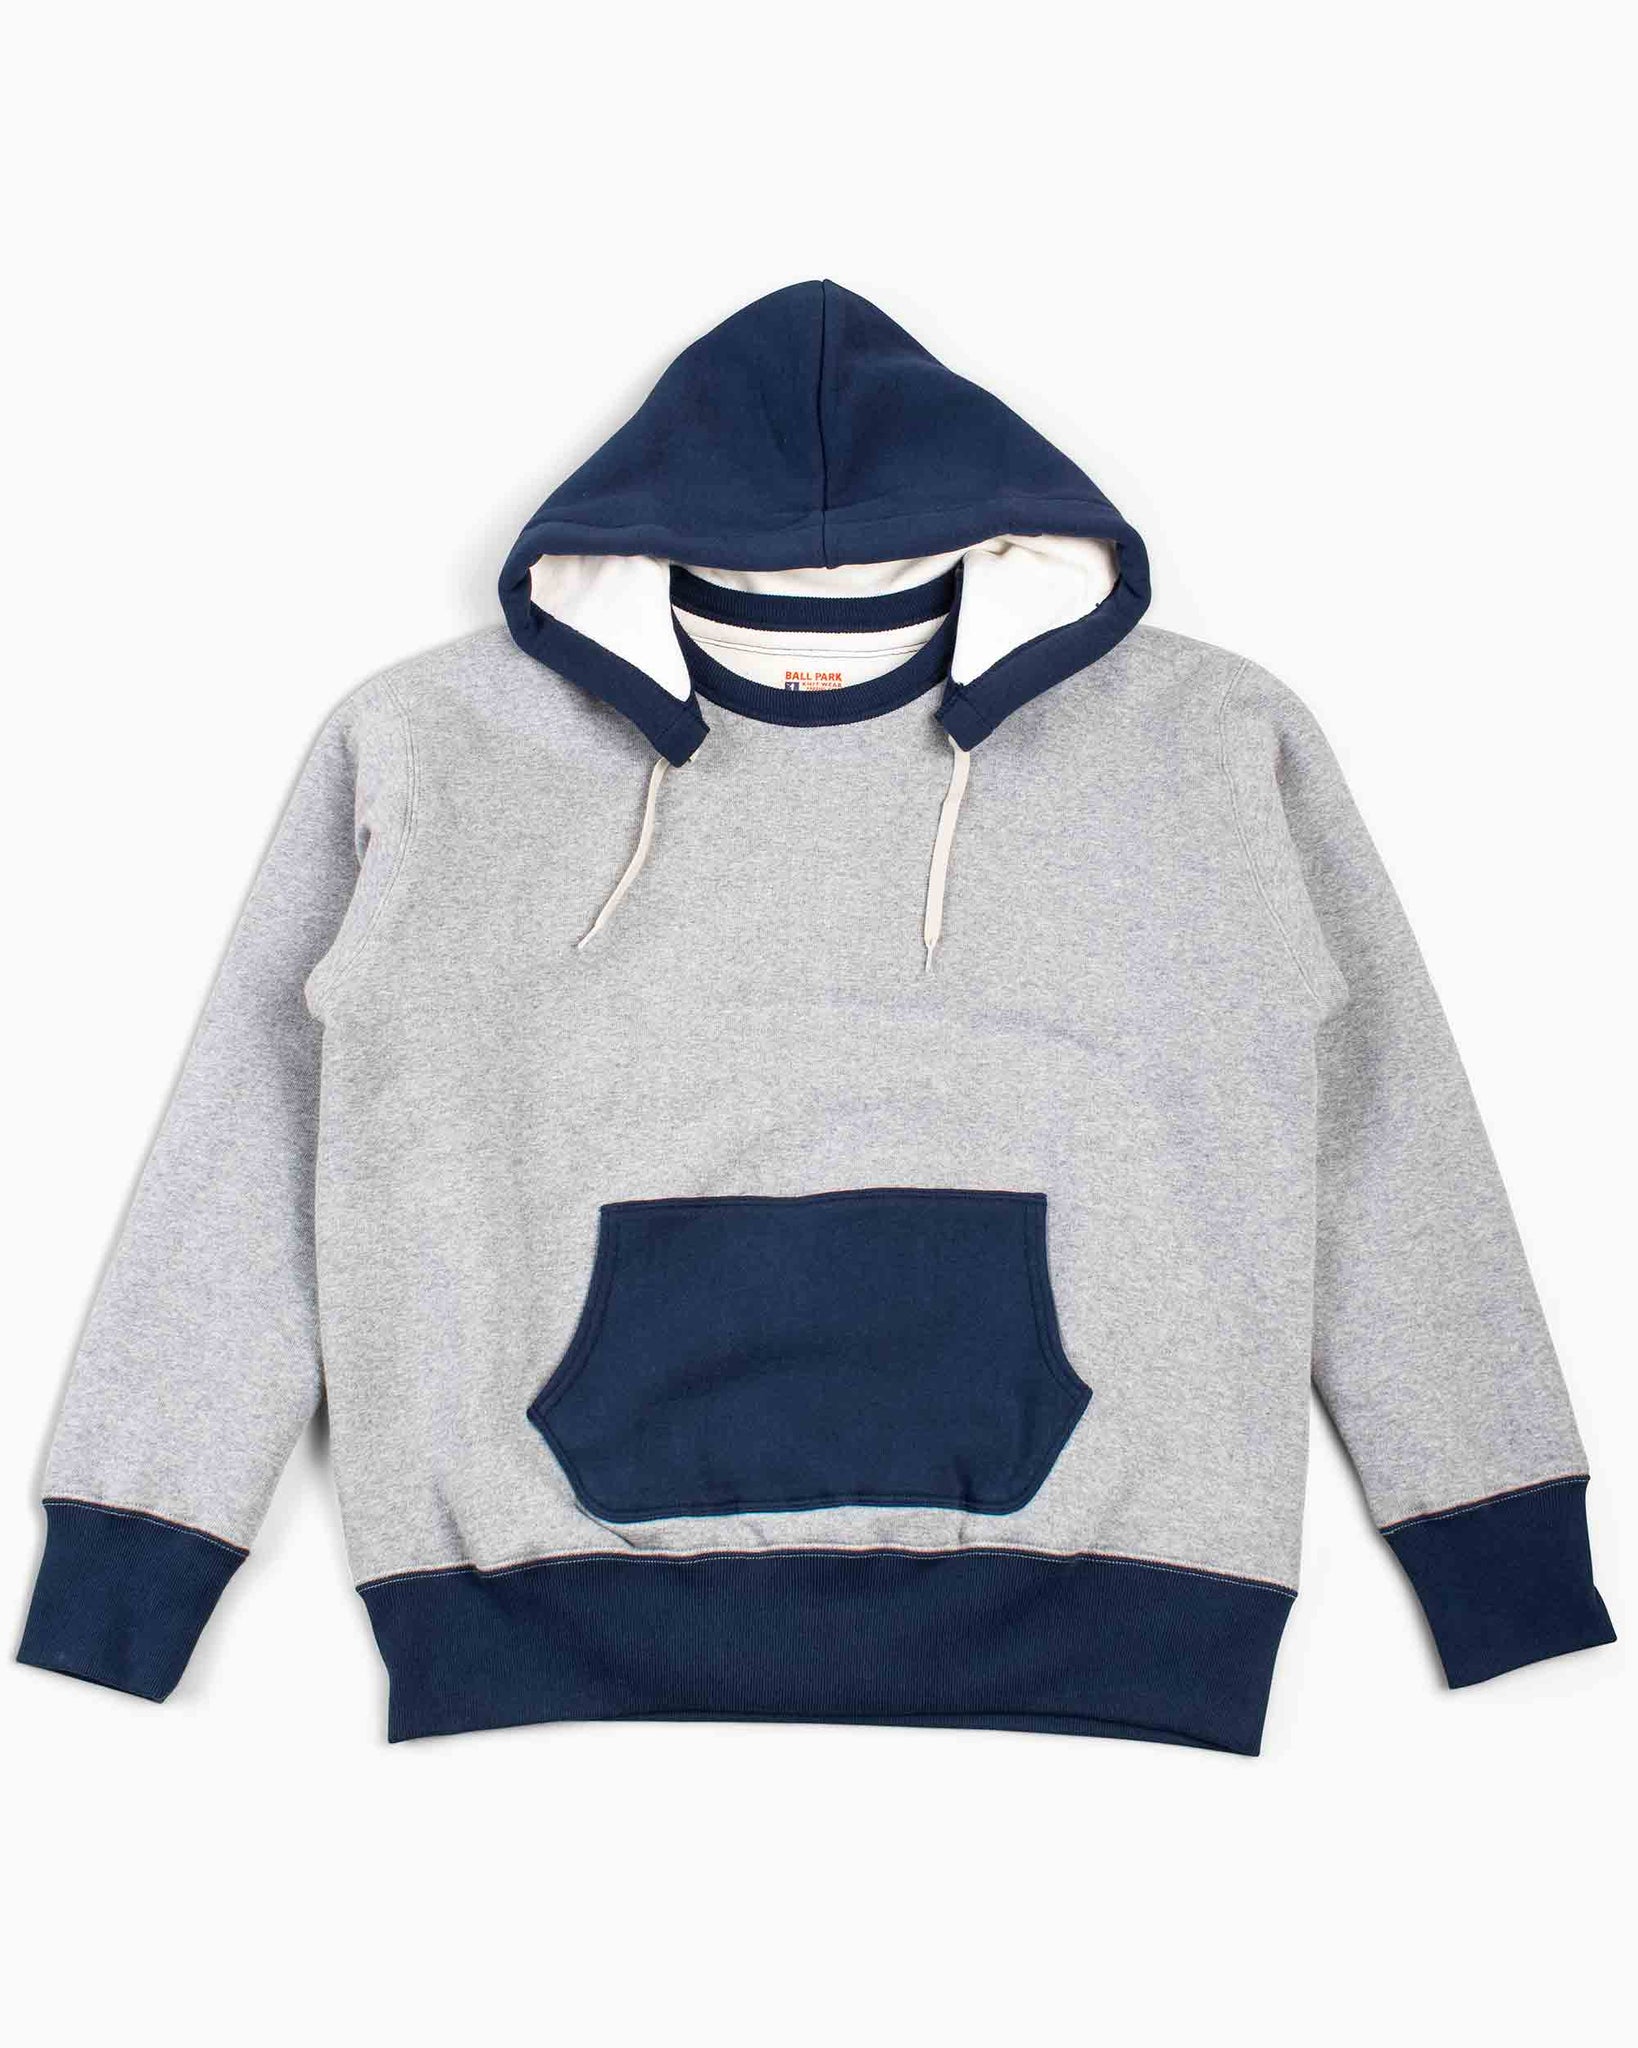 DOUBLE FACE AFTER-HOODED SWEATSHIRT